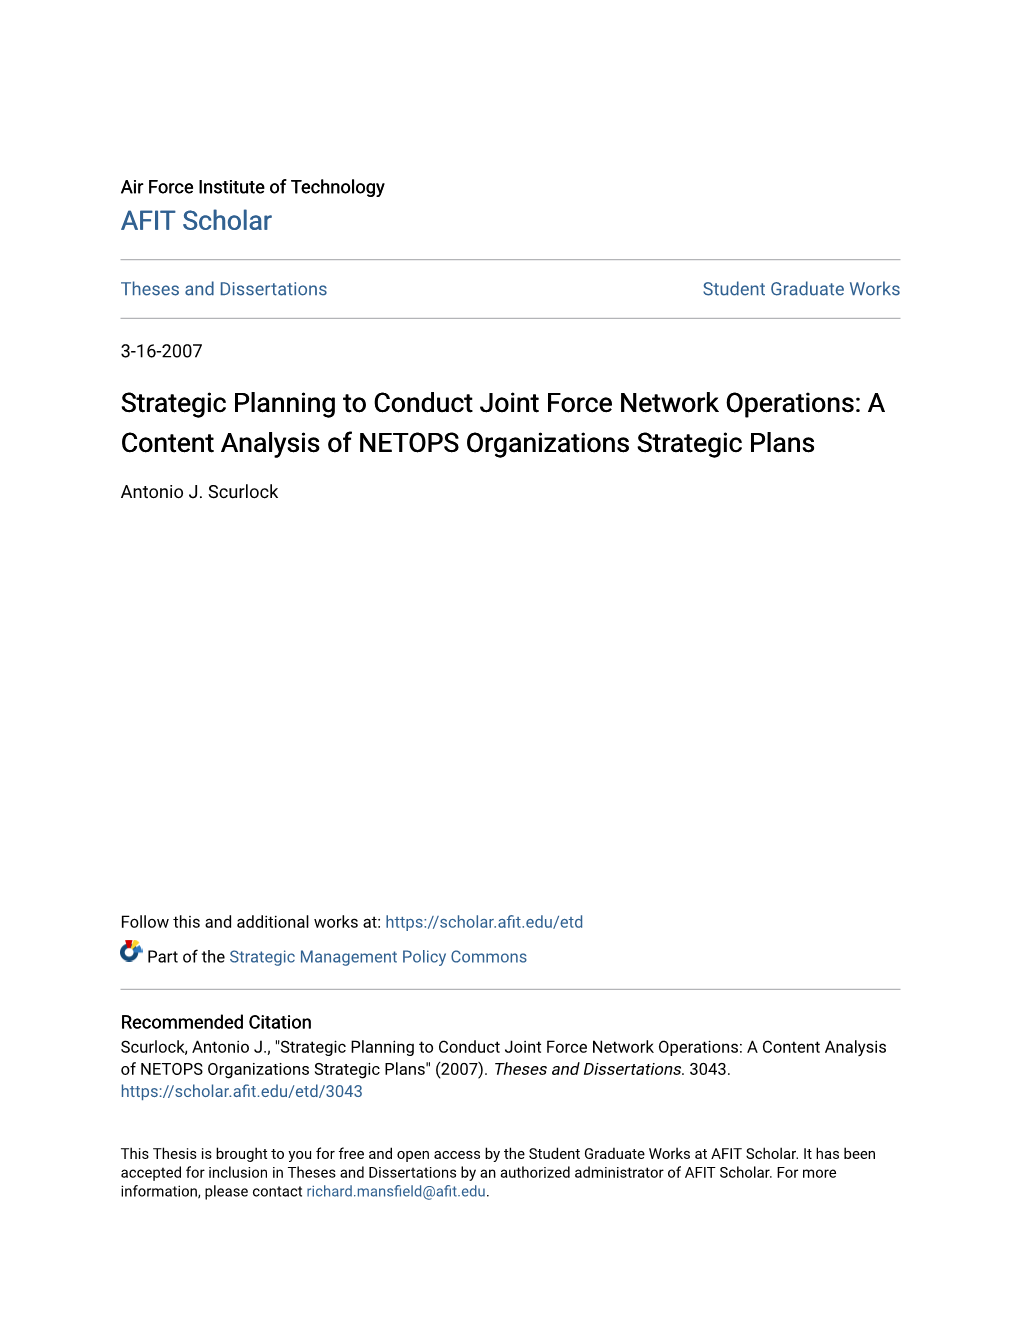 A Content Analysis of NETOPS Organizations Strategic Plans